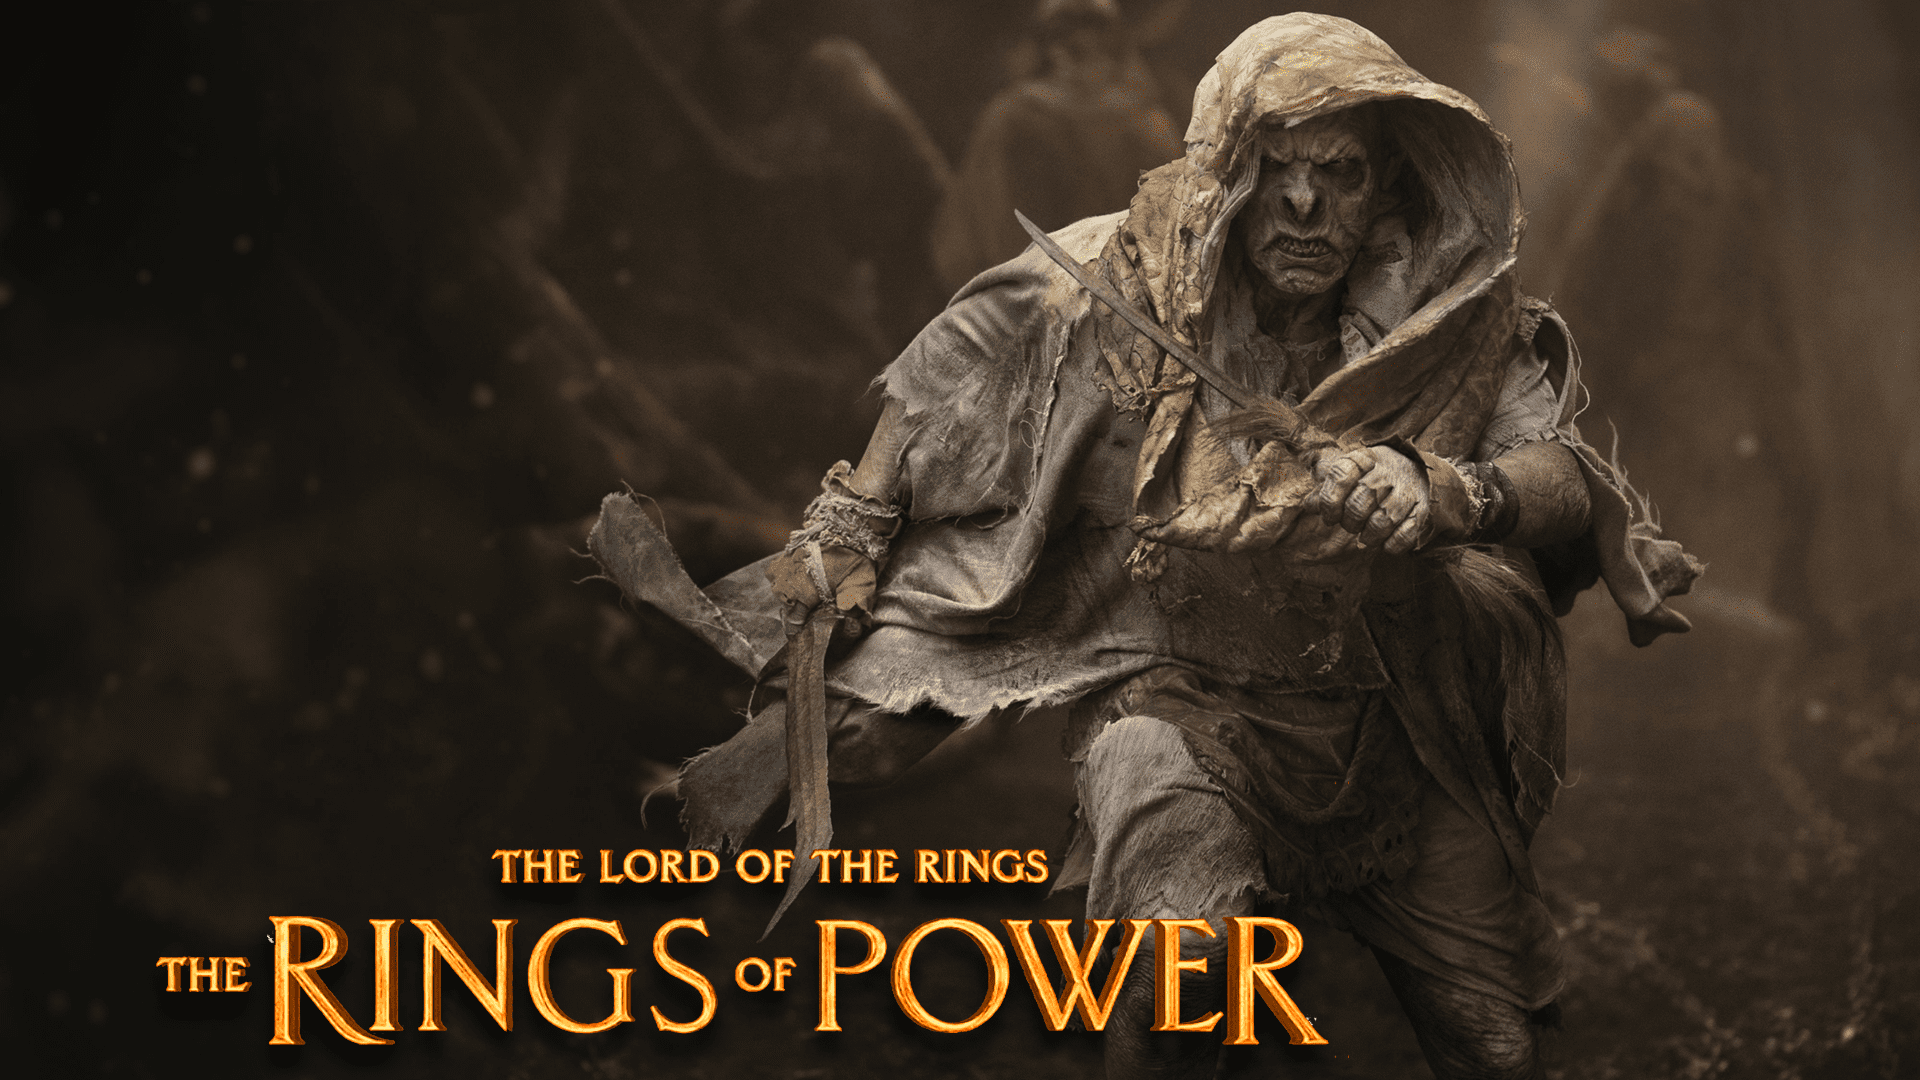 The Rings of Power Episode 3